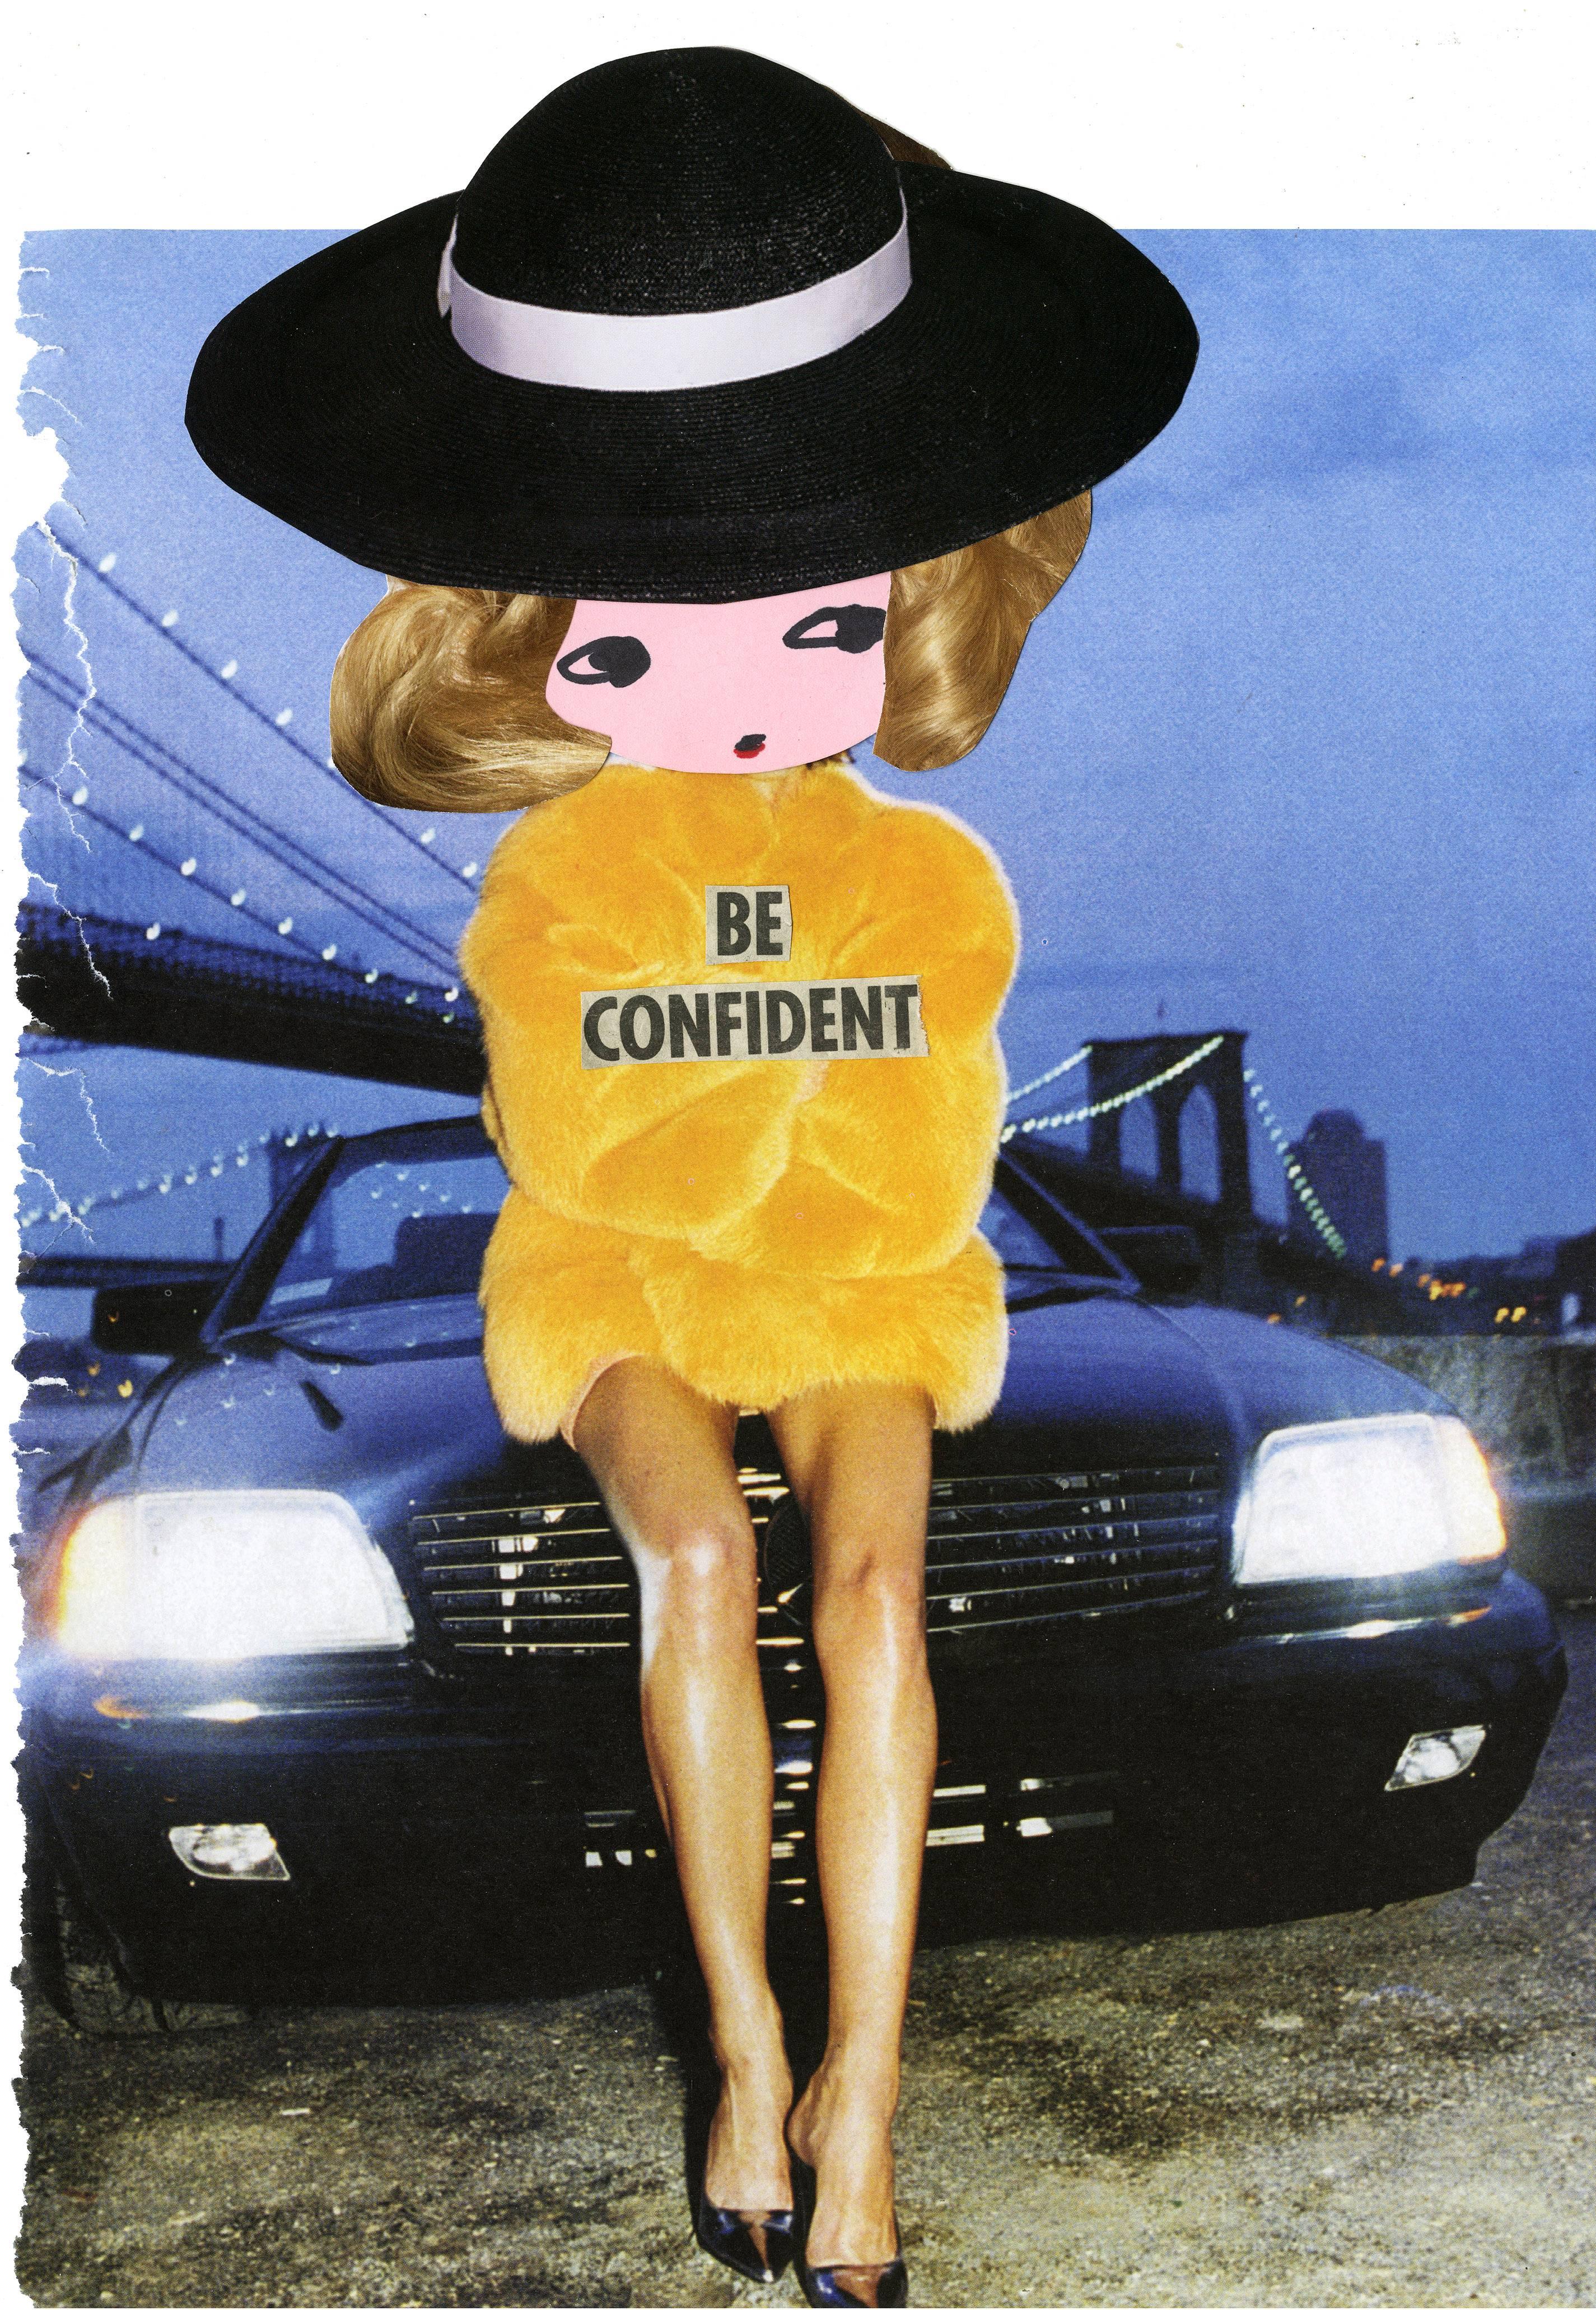 Be Confident - Print by Phoebe New York